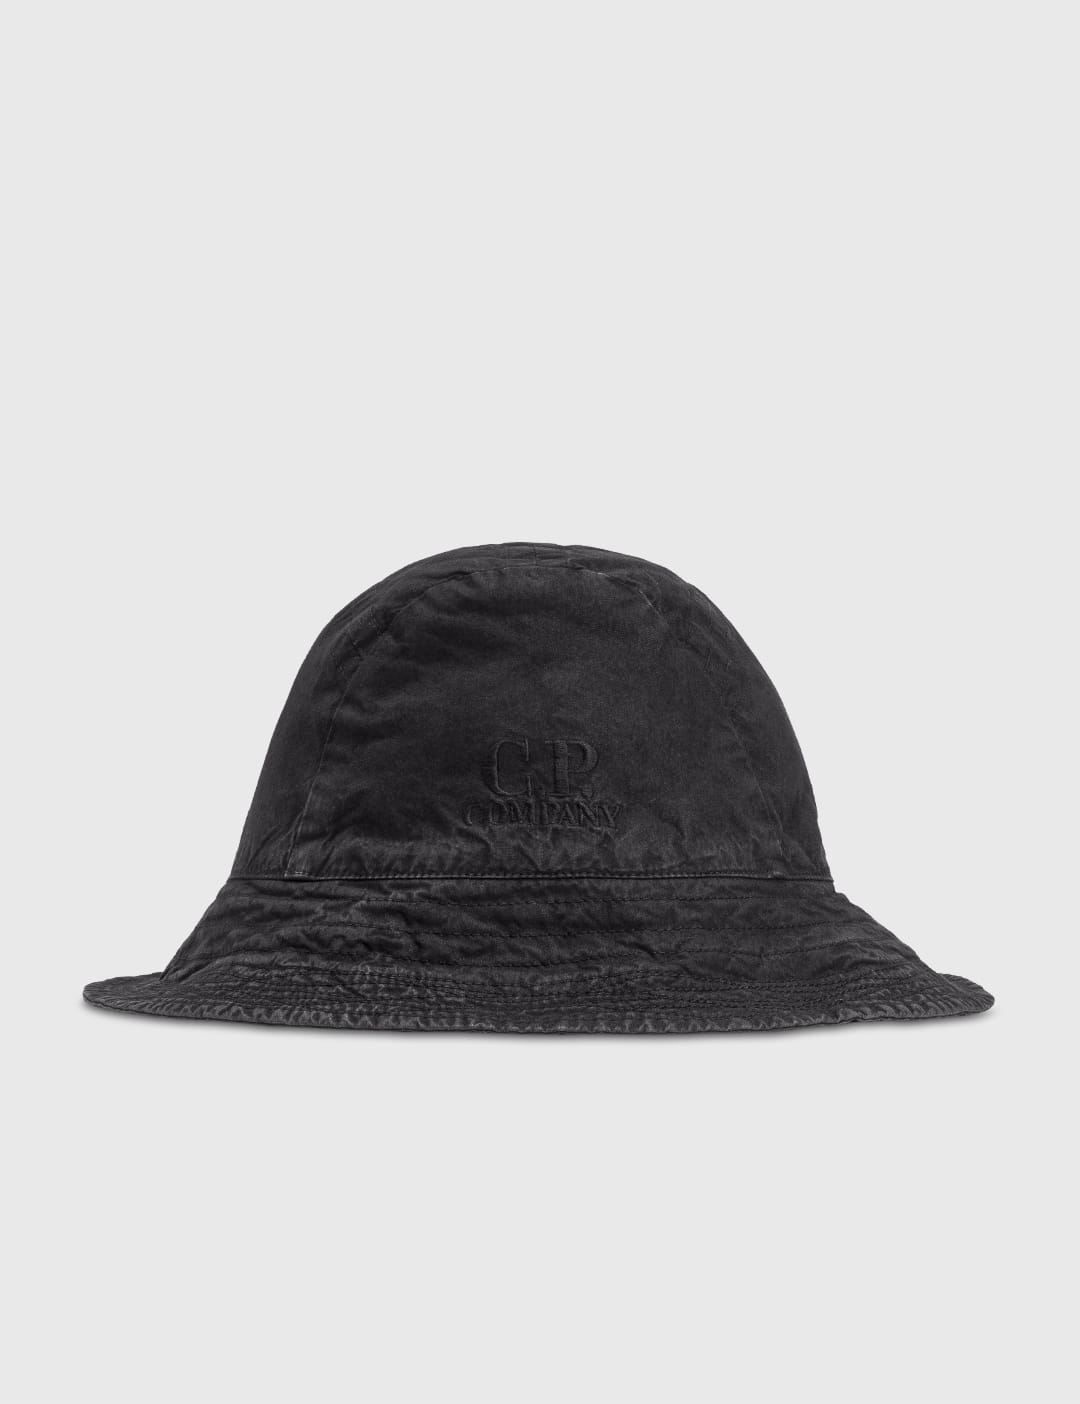 Needles - Sailor Hat | HBX - Globally Curated Fashion and 